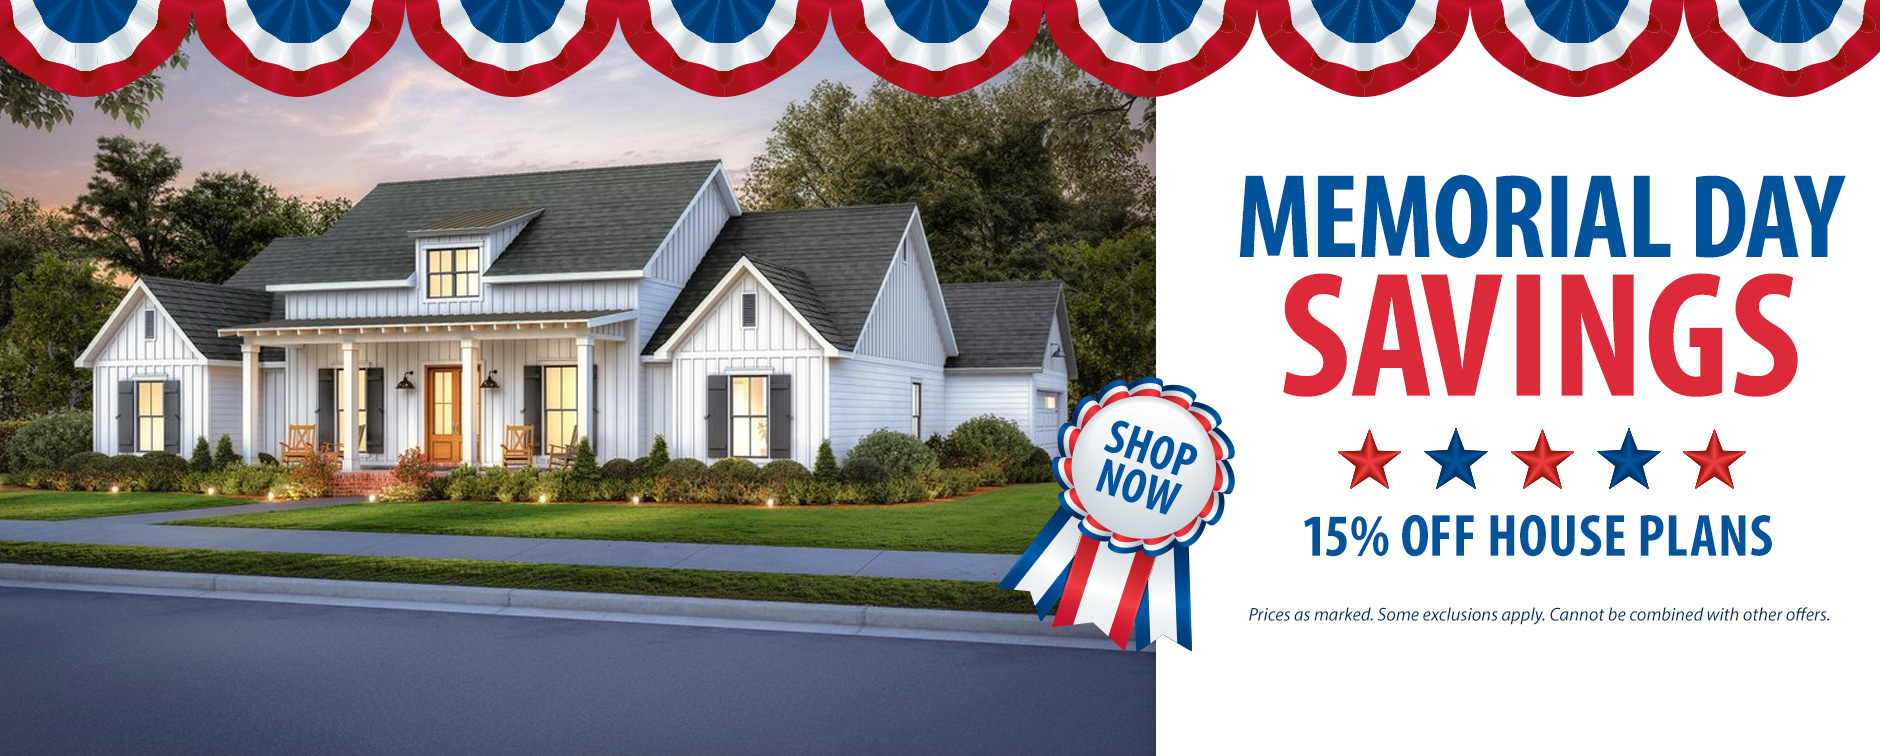 Take Advantage of Memorial Day Savings! Get 15% Off House Plans.